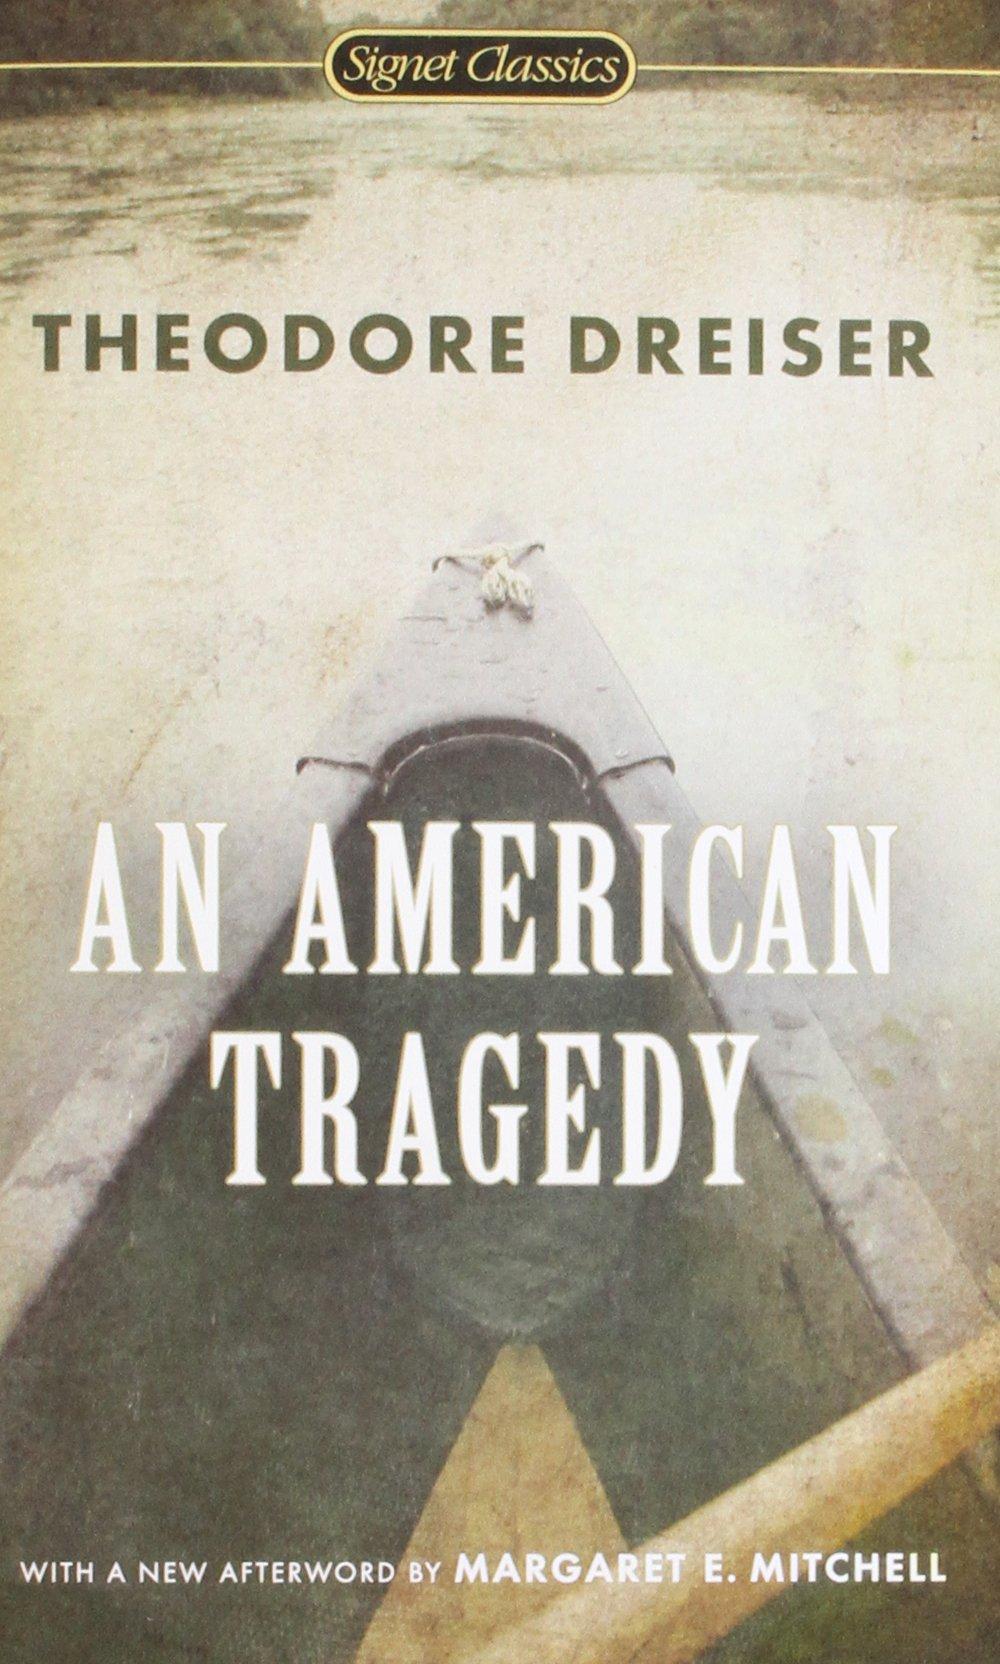 Literature- Theodore Dreiser An American Tragedy (1925) ~Clyde Griffiths- Impoverished Son of Street Missionaries ~Aspires for Better Life ~Works as Bellhop and Enjoys Lavish Life ~Involved in